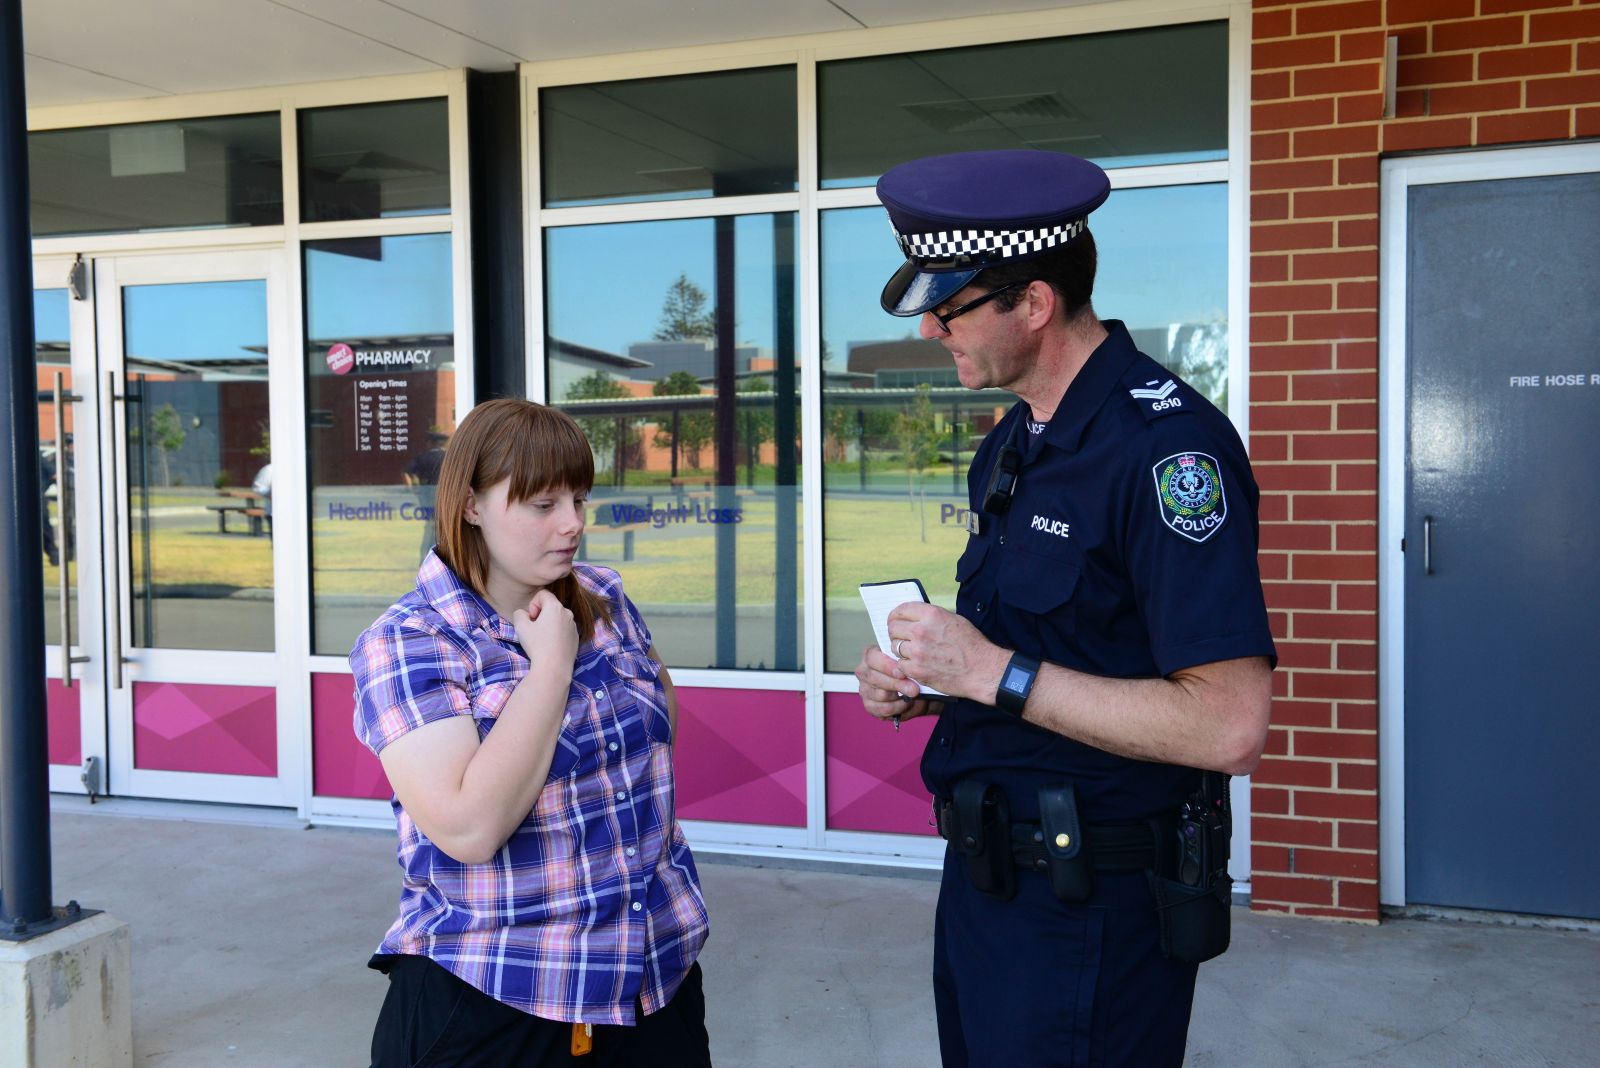 A woman talks to a police officer outside of a chemist. The police officer is writing down what she says in a notebook.